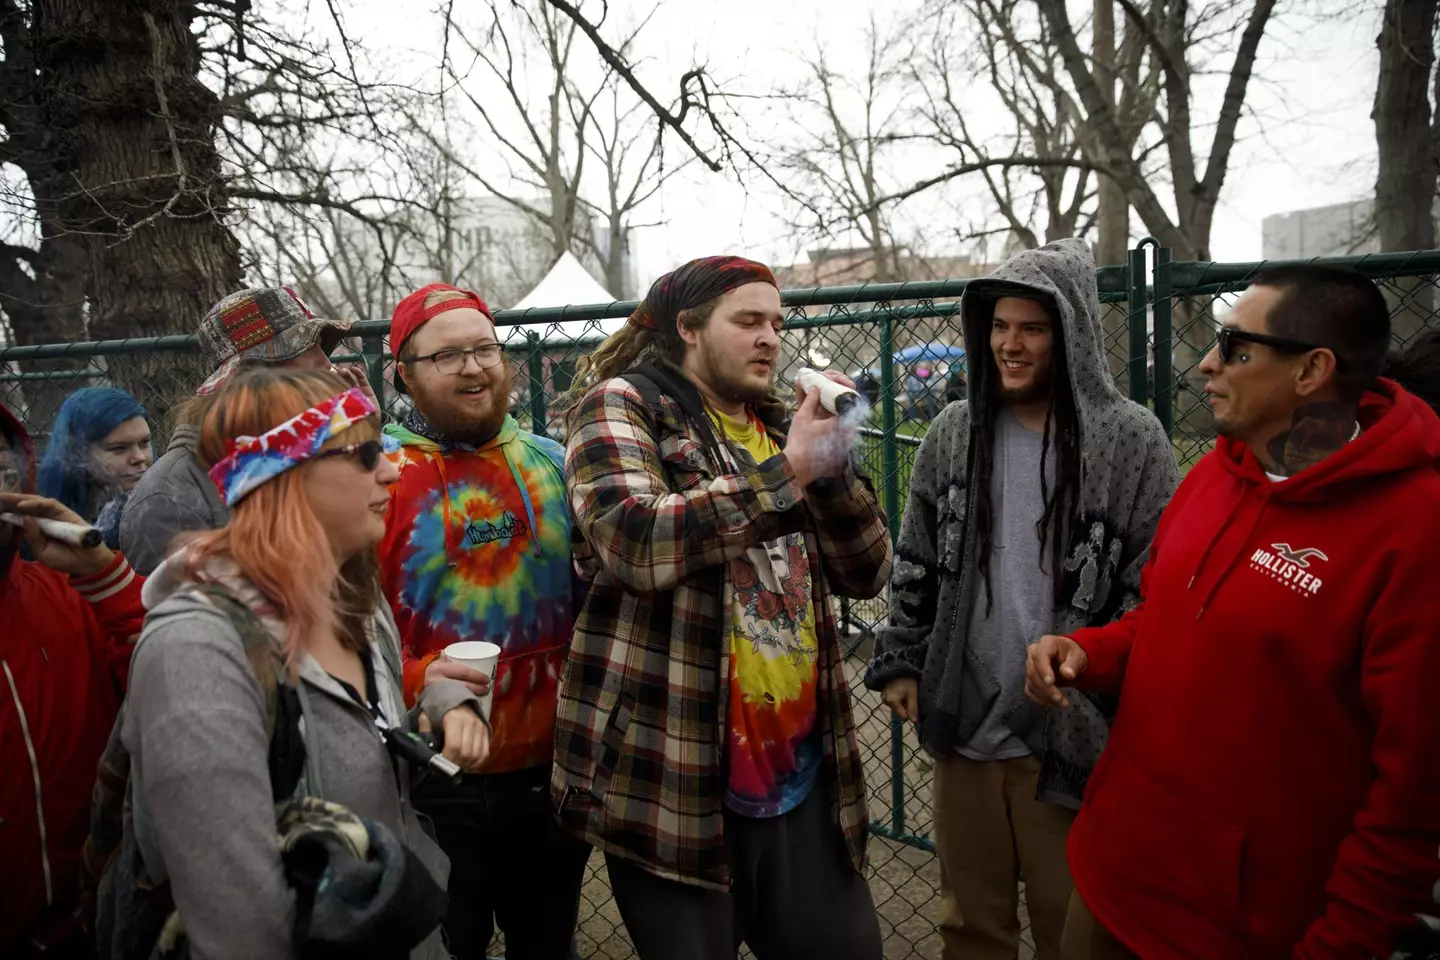 People smoke at the Mile High 420 Festival in Denver, Colorado.